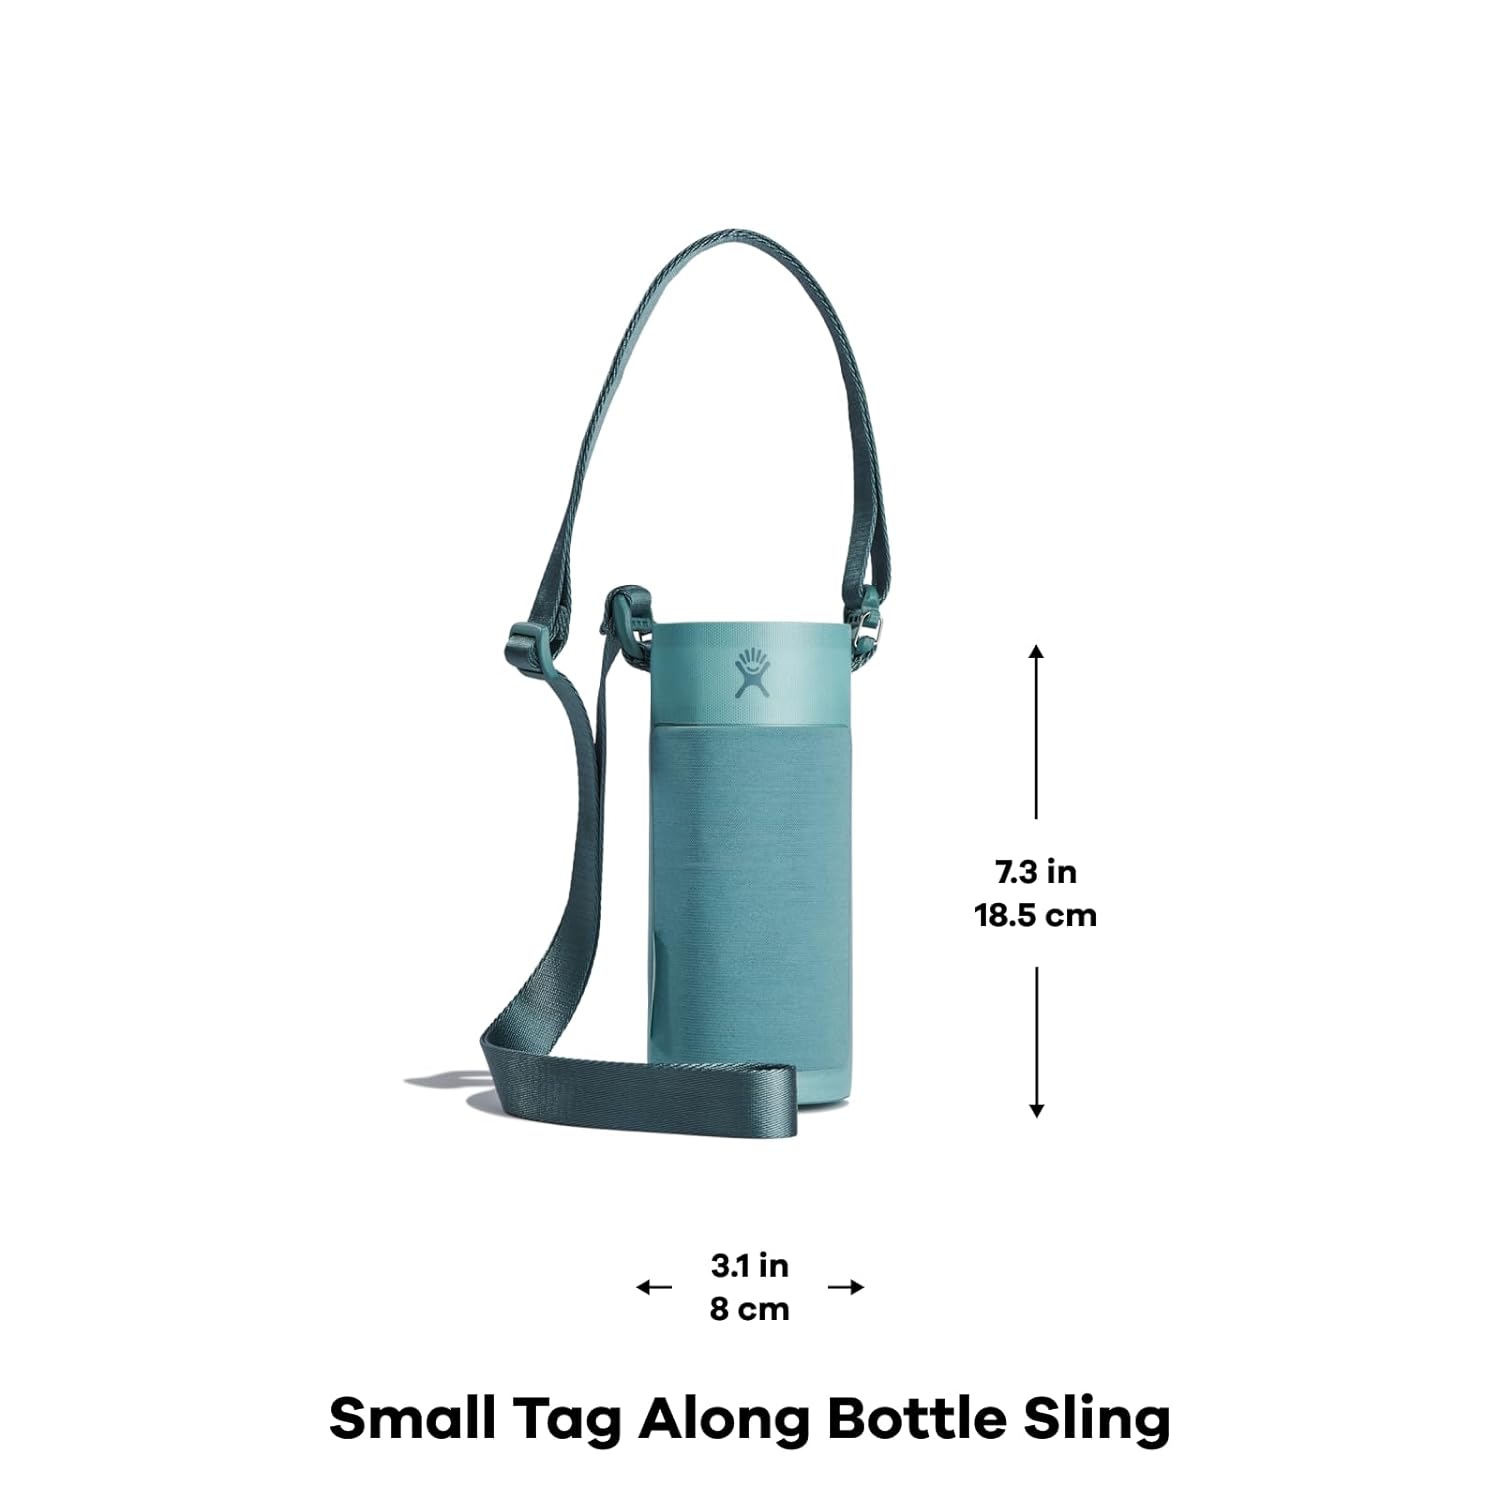 Hydro Flask Accessory Reusable Water Bottle Carrier Holder Small Packable Bottle Sling Yarrow - for 12 oz, 16 oz, 18 oz, 20 oz, 21 oz, and 24 oz Bottles - Adjustable, Collapsable, BPA-Free, Non-Toxic